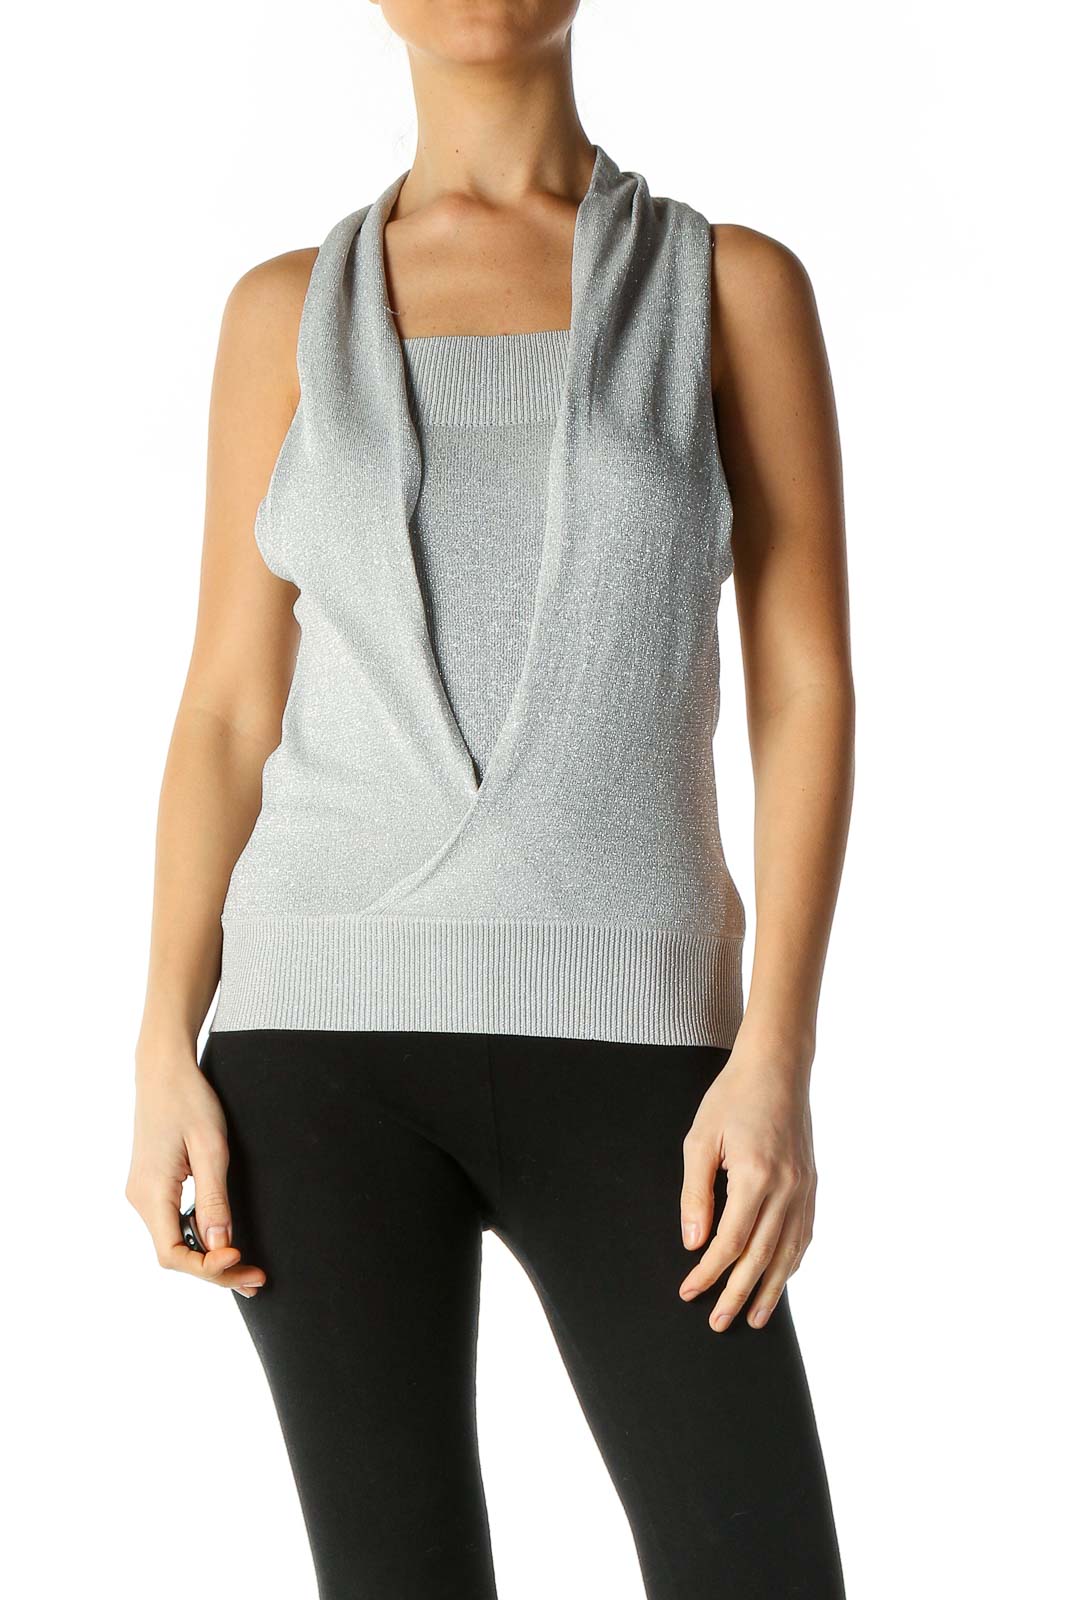 Gray Textured Casual Tank Top Front